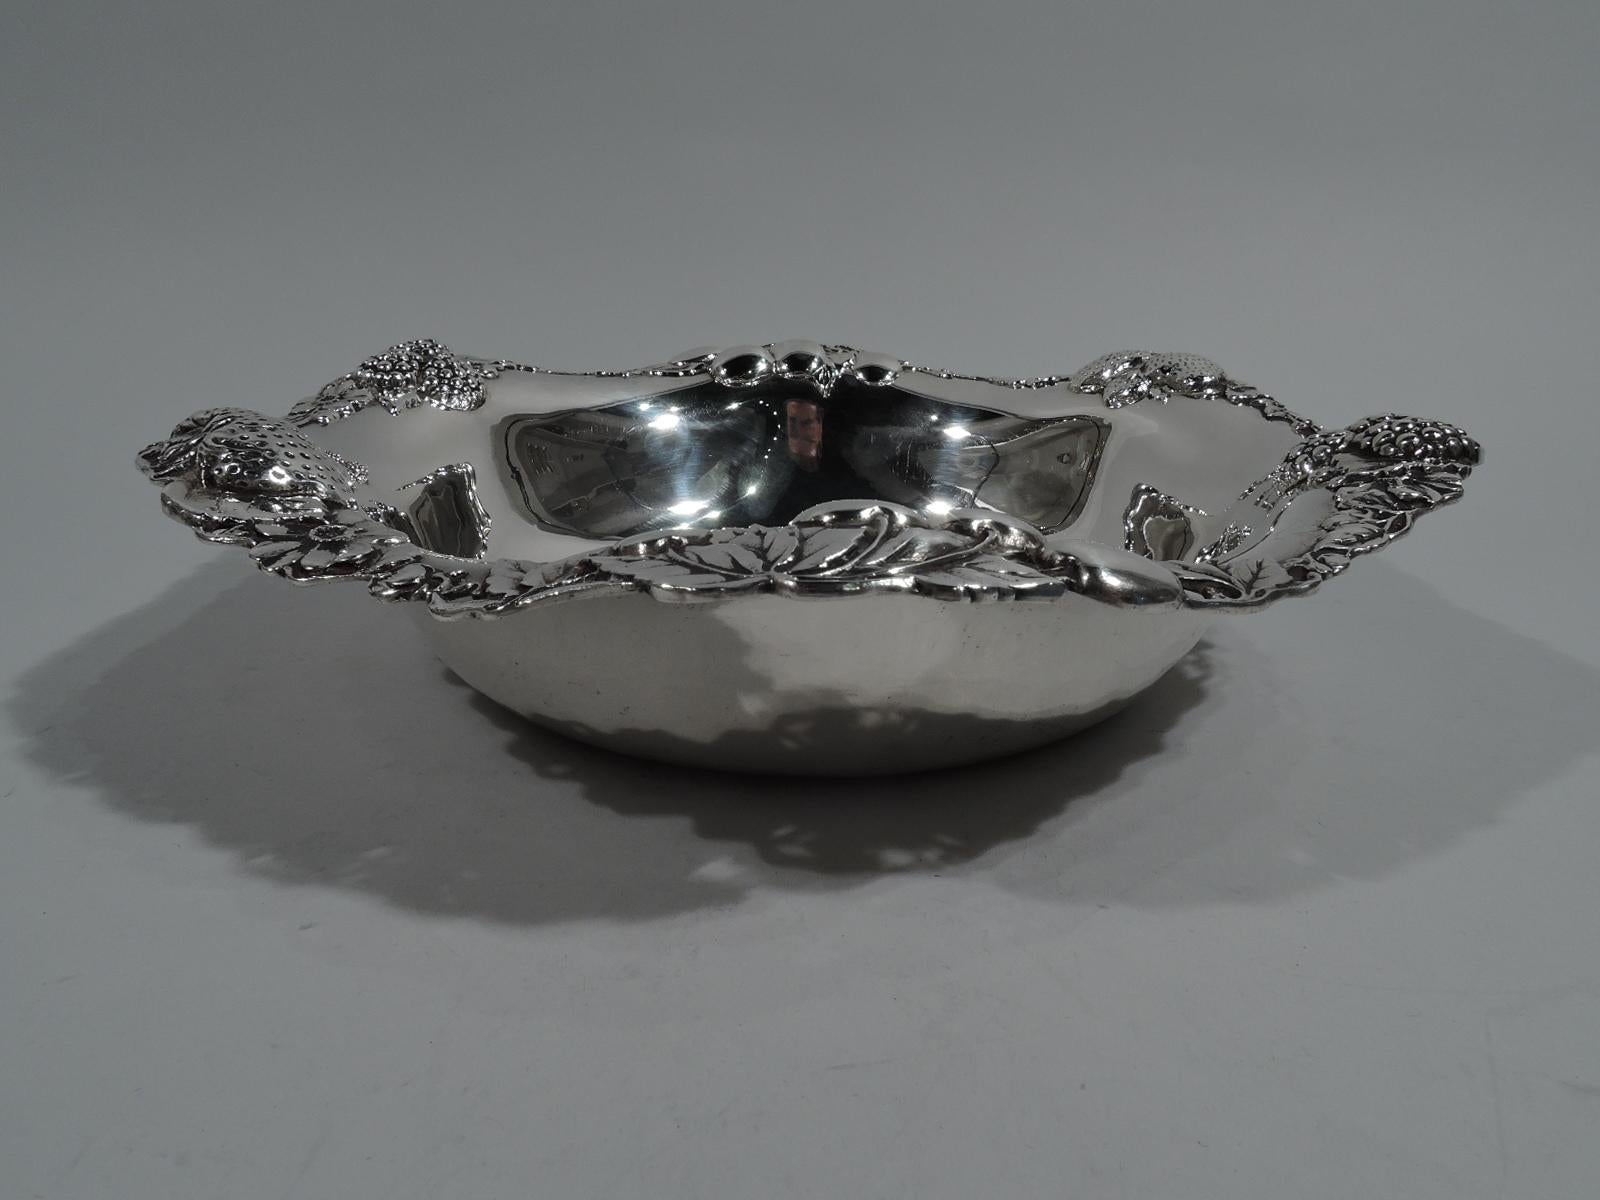 Sterling silver bowl. Made by Gorham in Providence in 1904. Plain well and pierced and wavy rim. Strawberries, blackberries, and cherries as well as blossoms applied to rim. A pretty design that captures the lush ripeness of the fruit. Fully marked